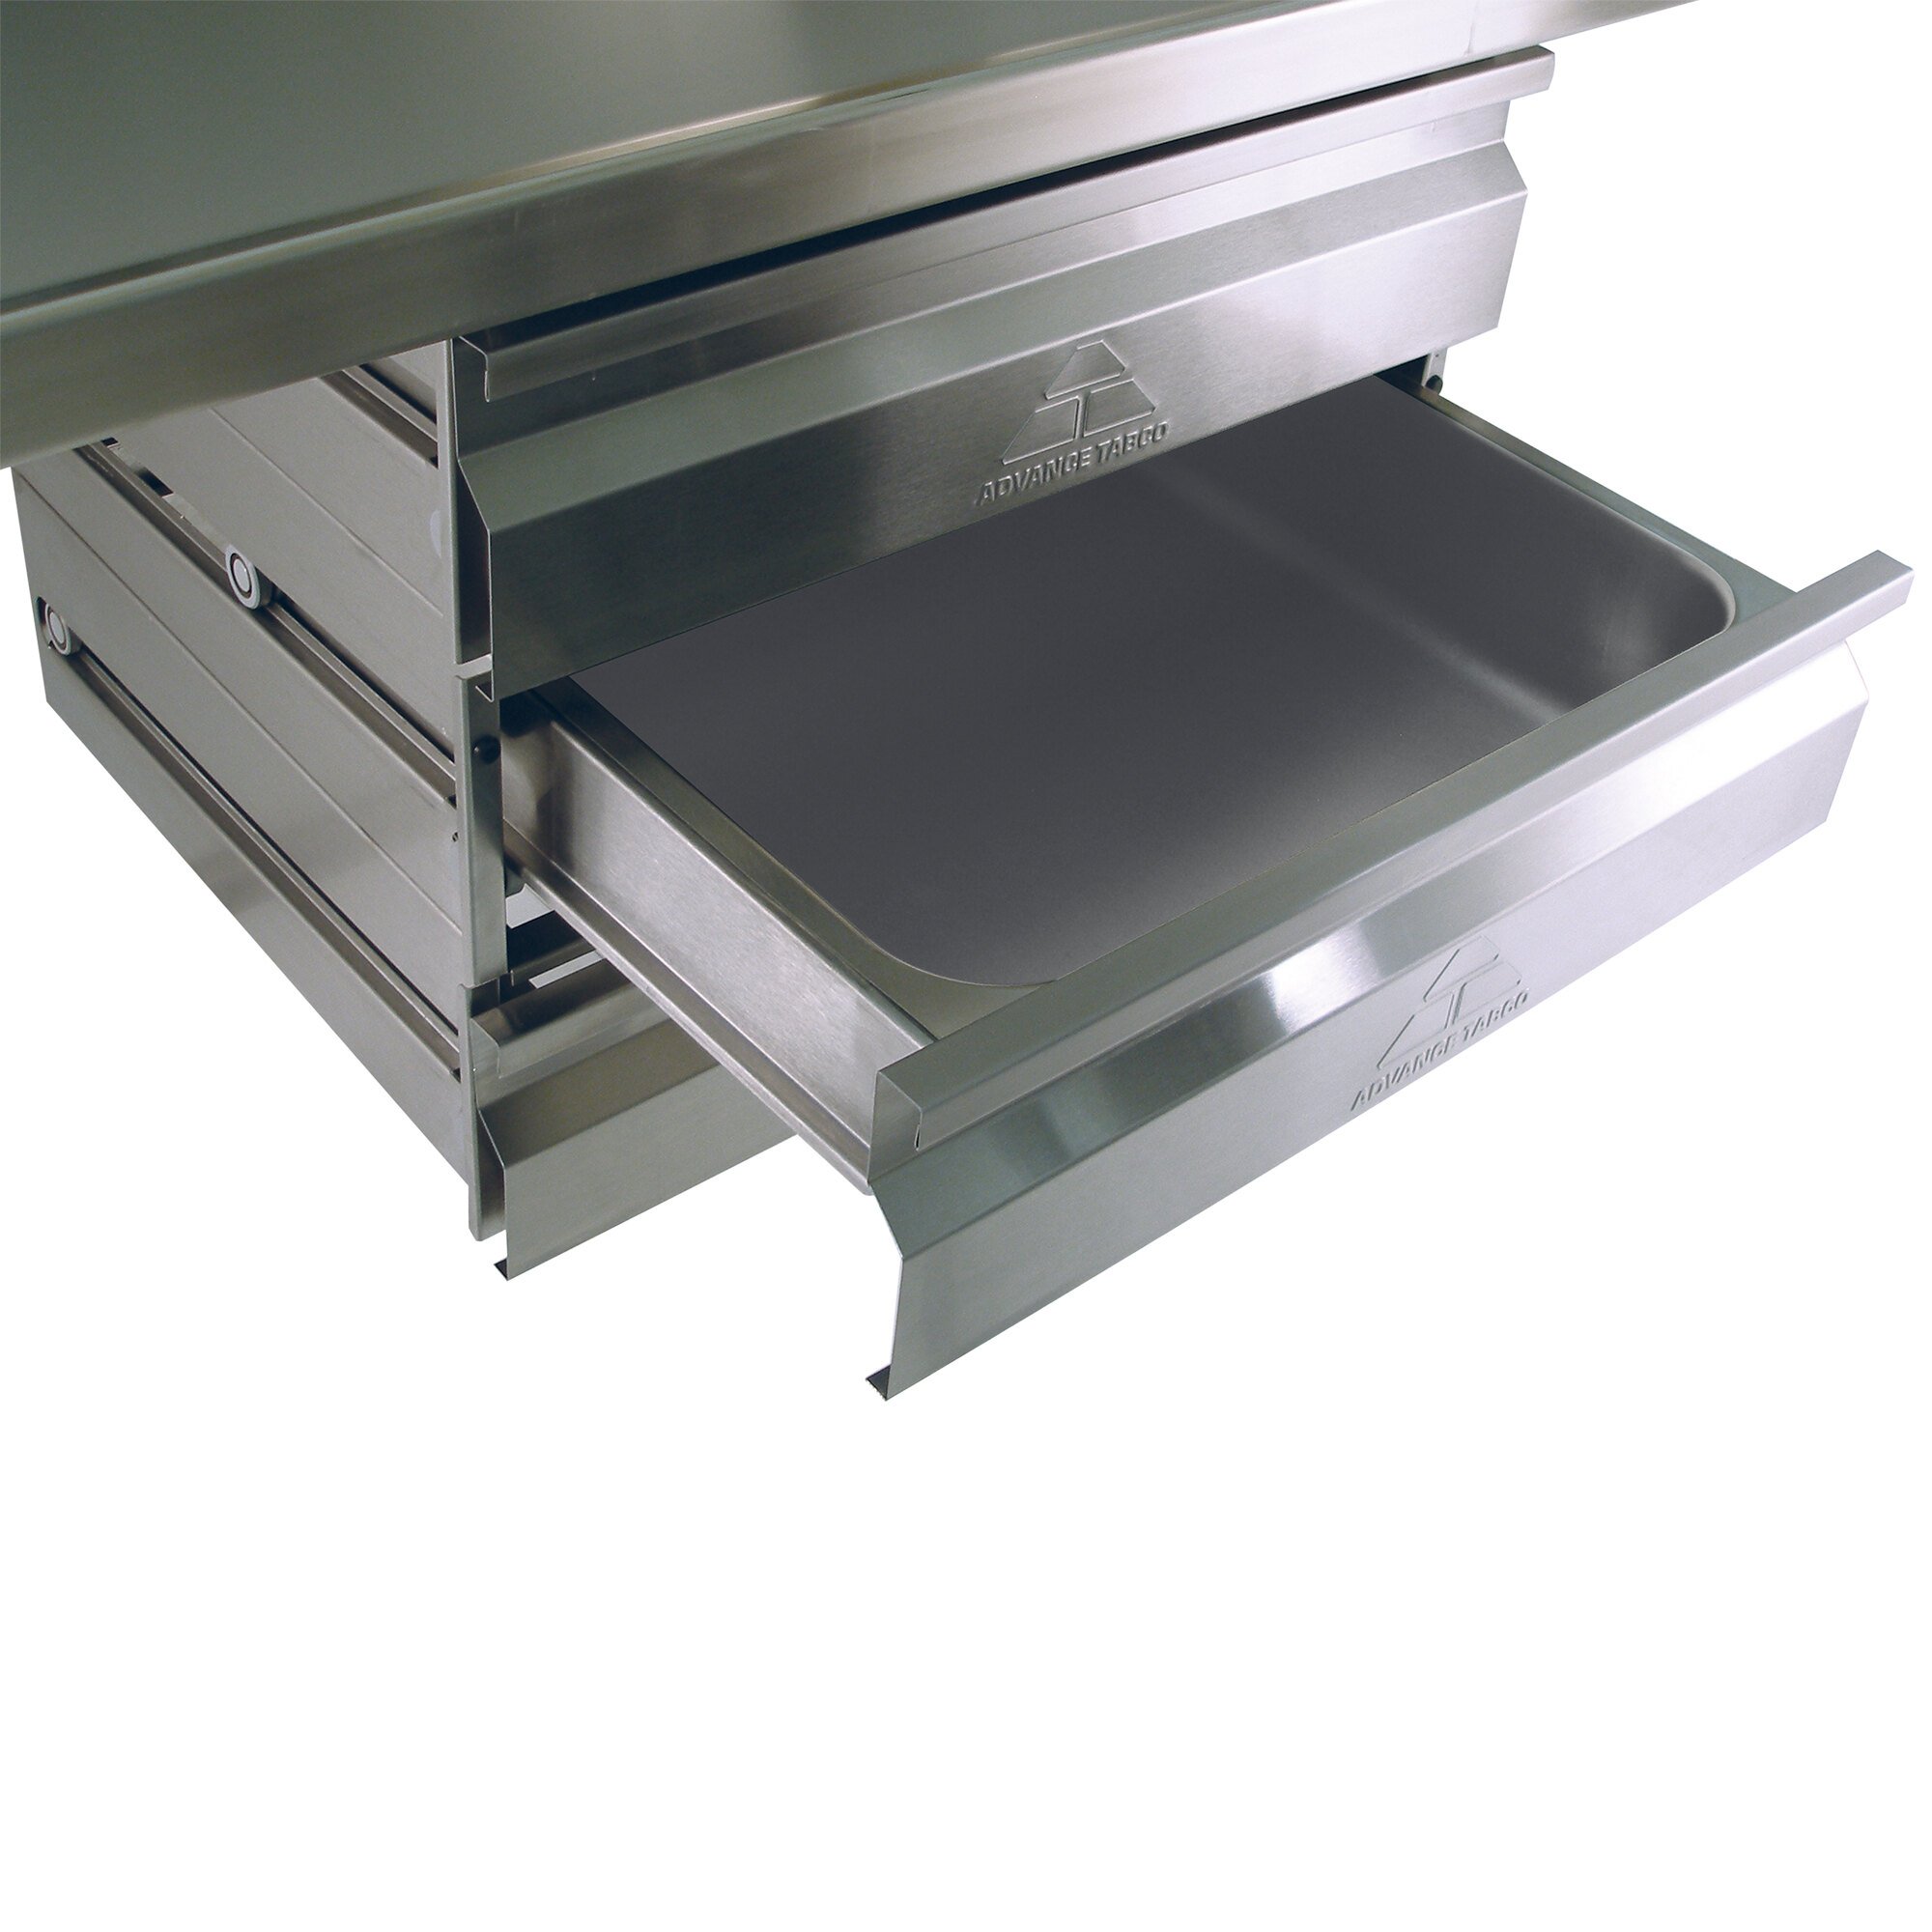 Advance Tabco SHD1520 Stainless Steel Drawer 15" x 20"